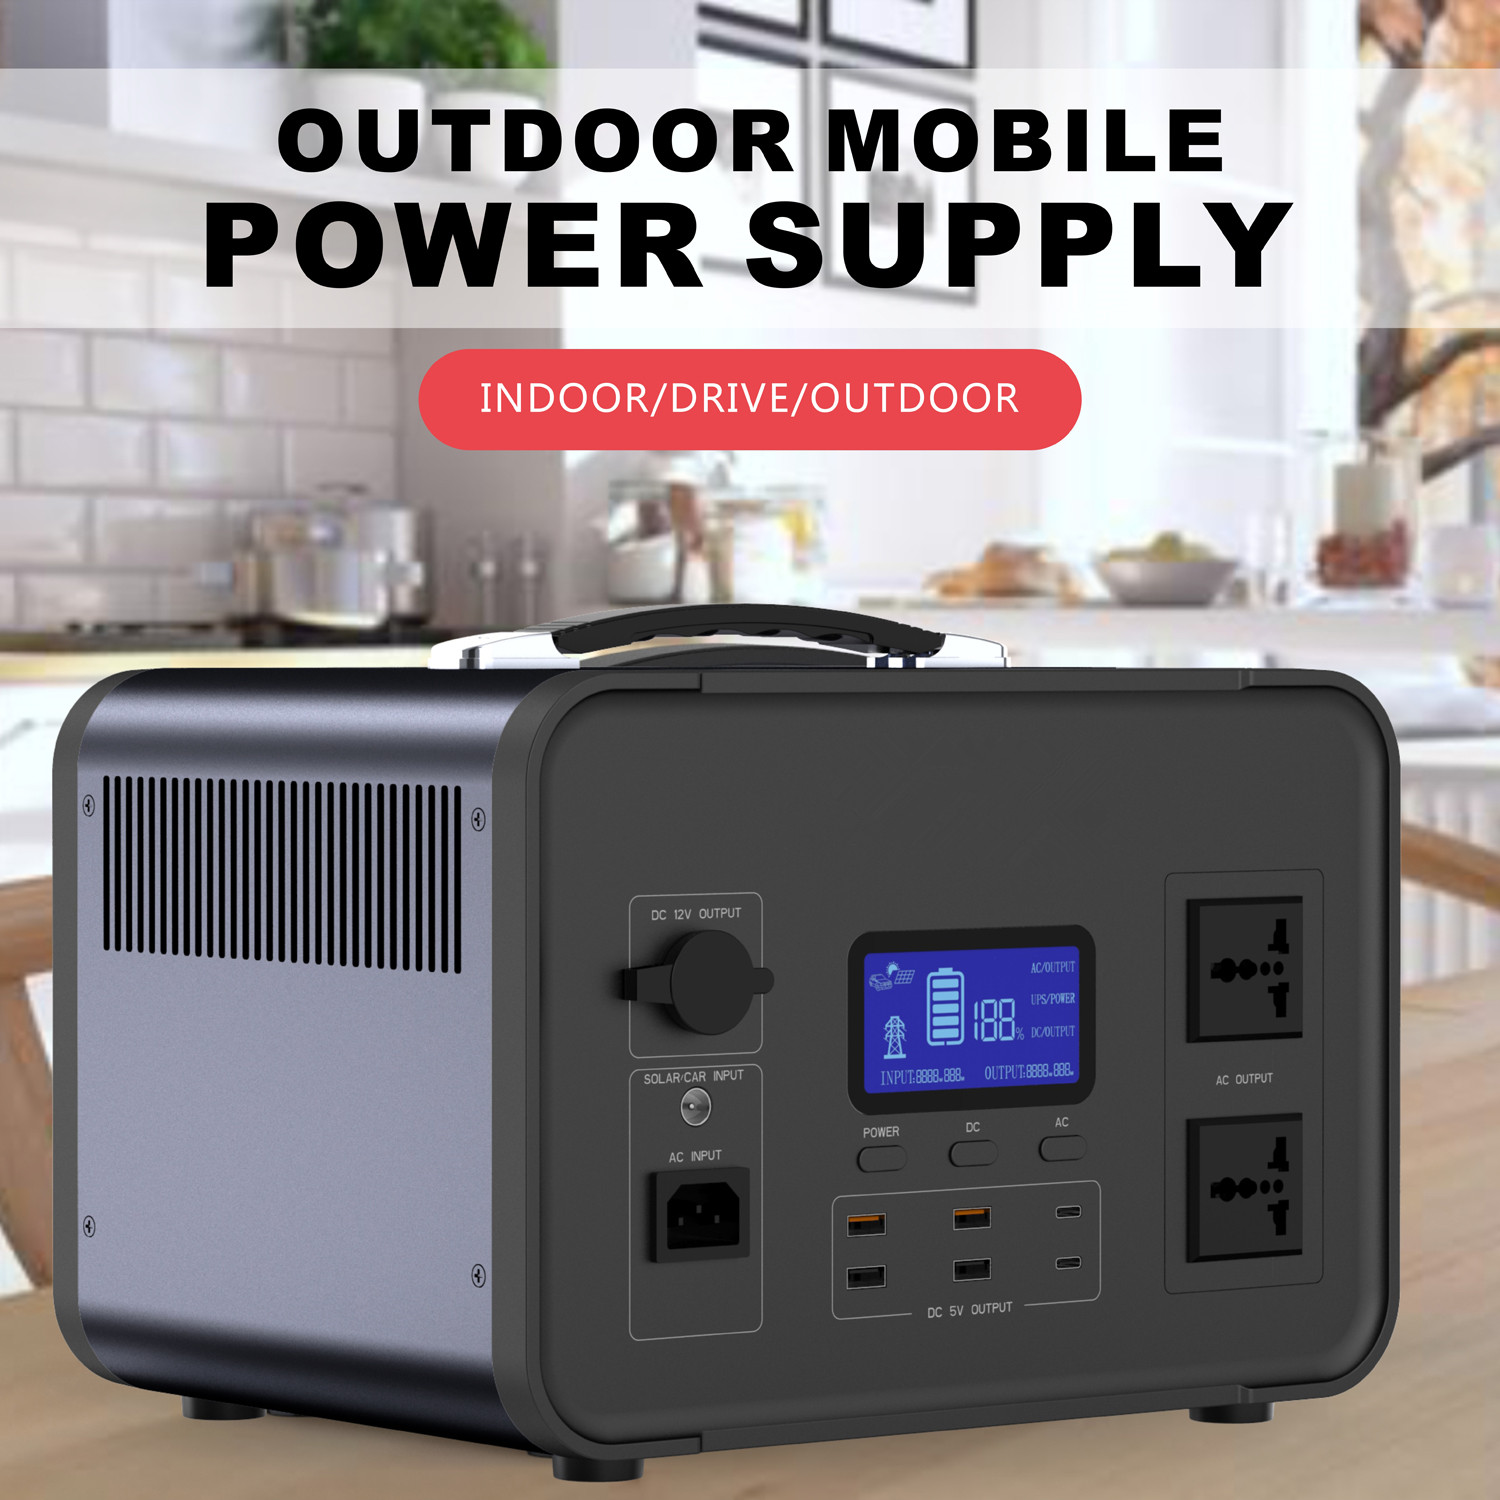 How long can a 1000wh energy storage power supply be used at outdoors?